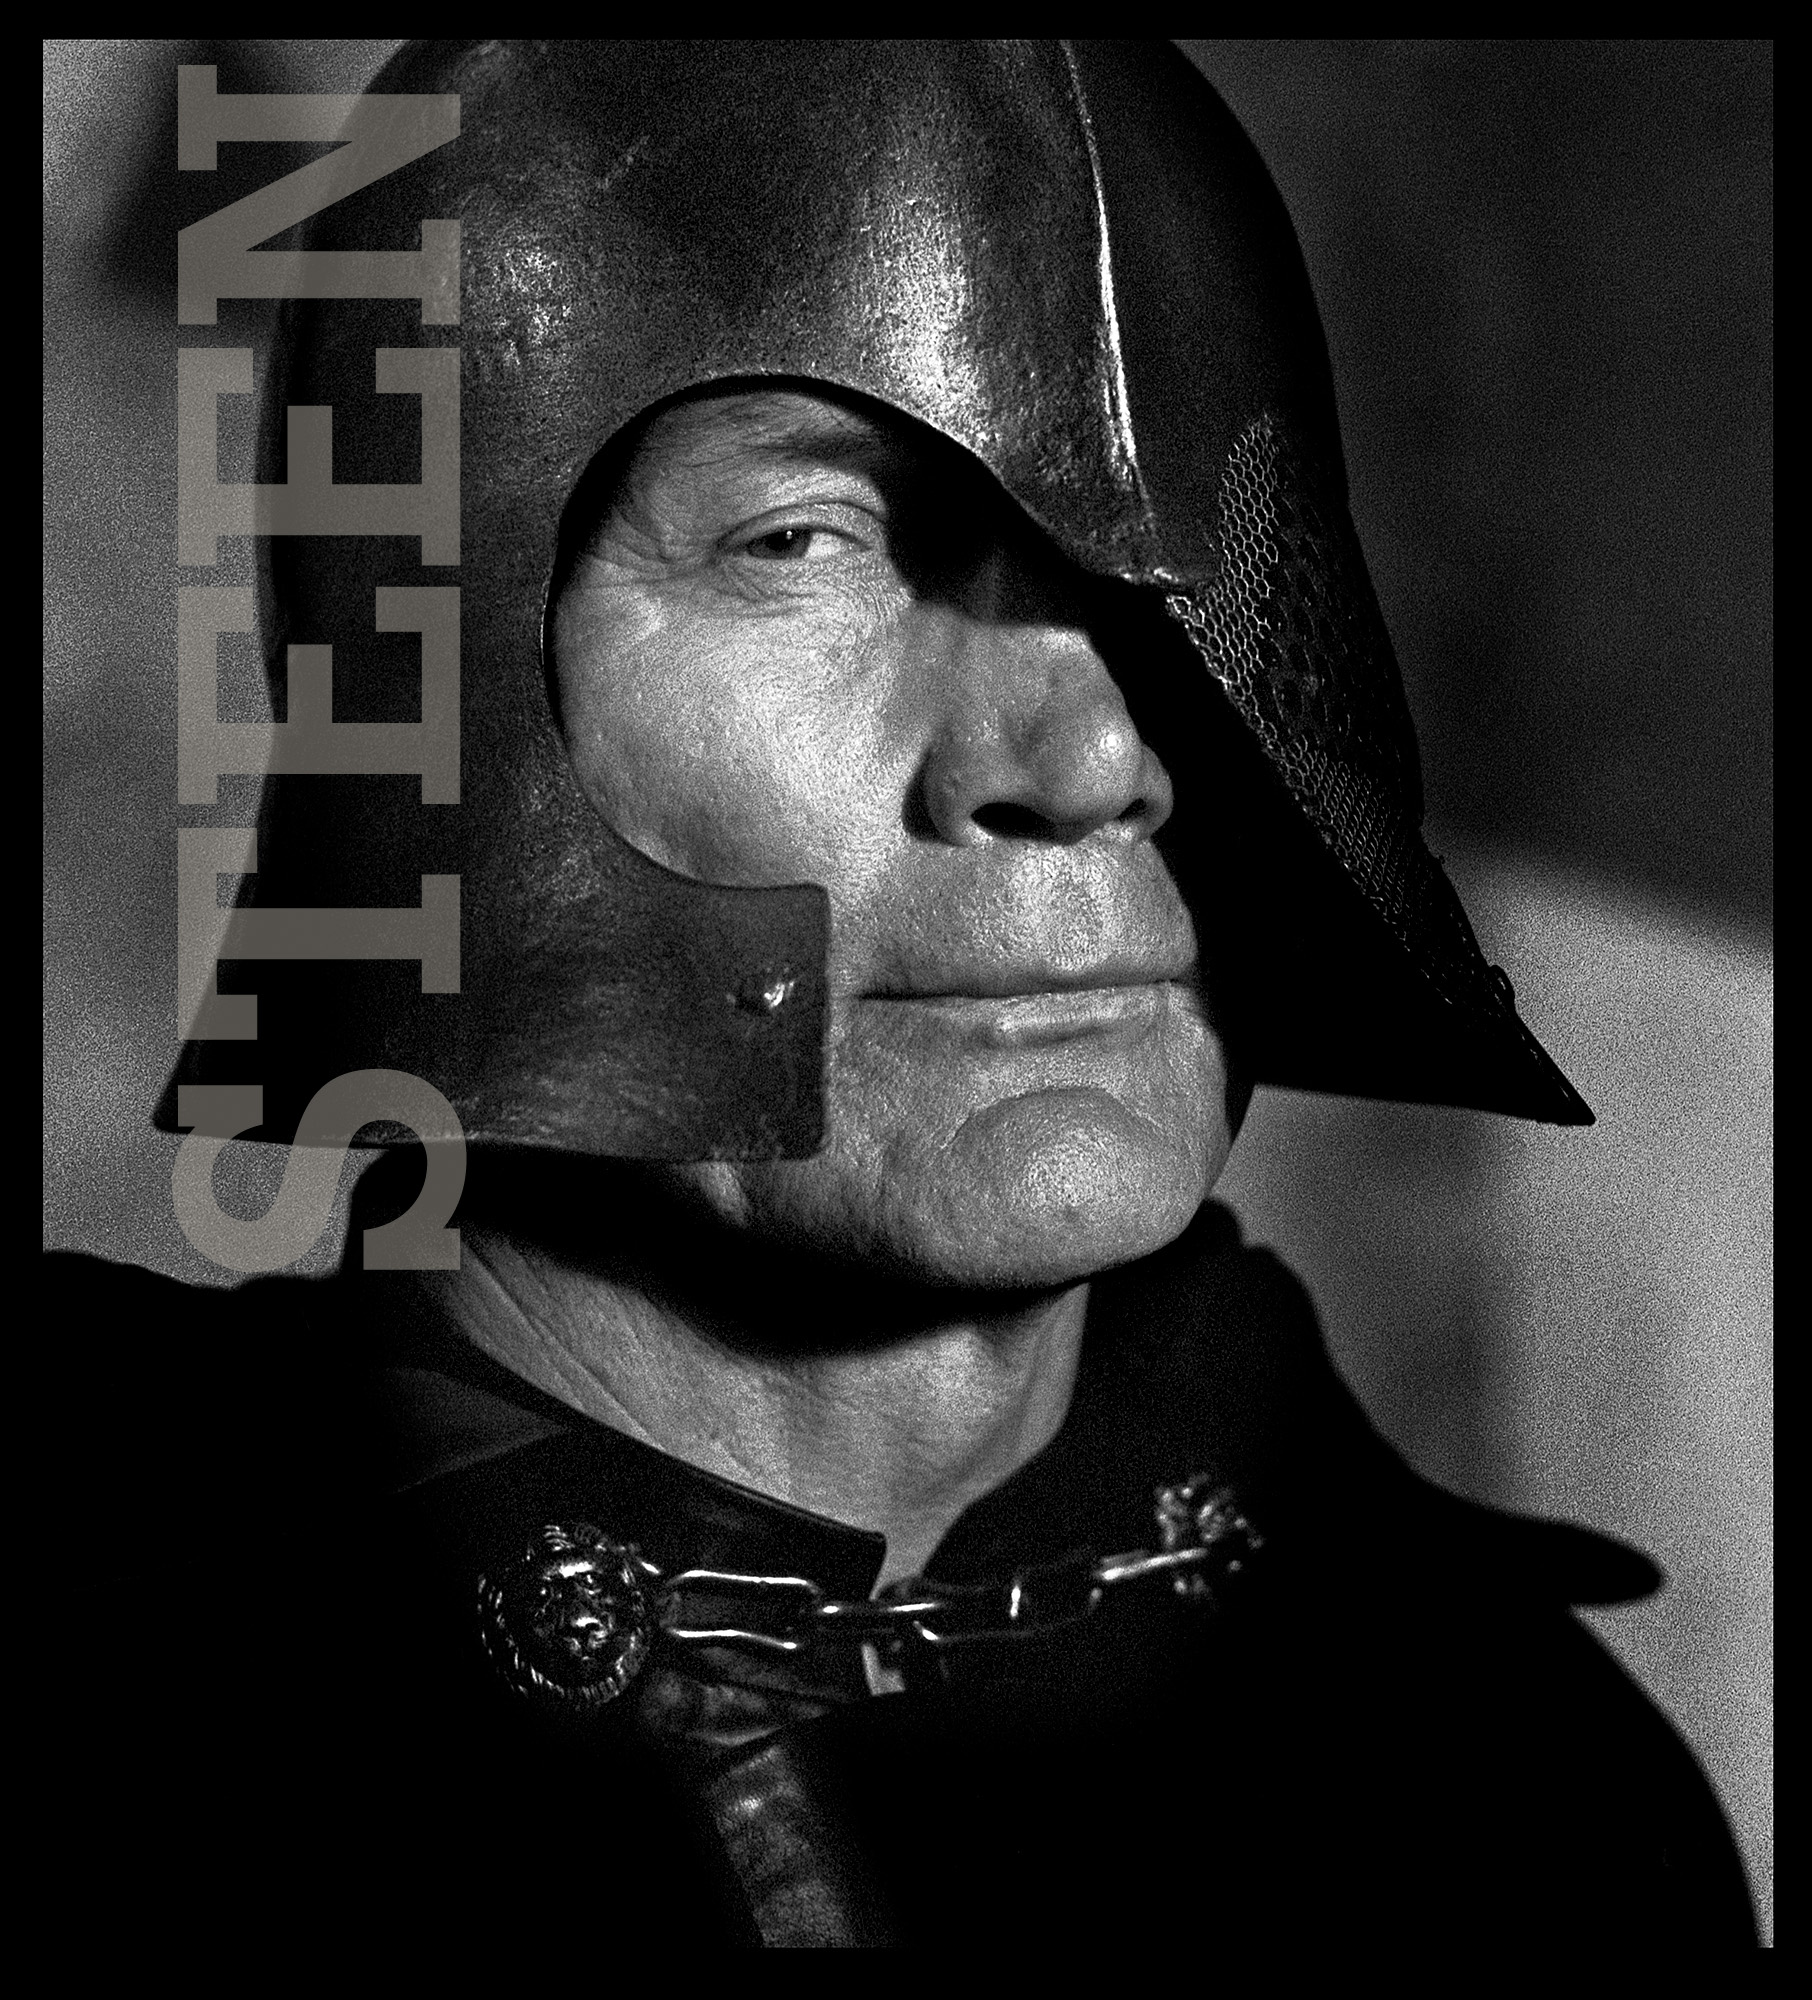 an exclusive limited edition black and white photograph of jack palance as hawk the slayer in voltan by british photographer david steen